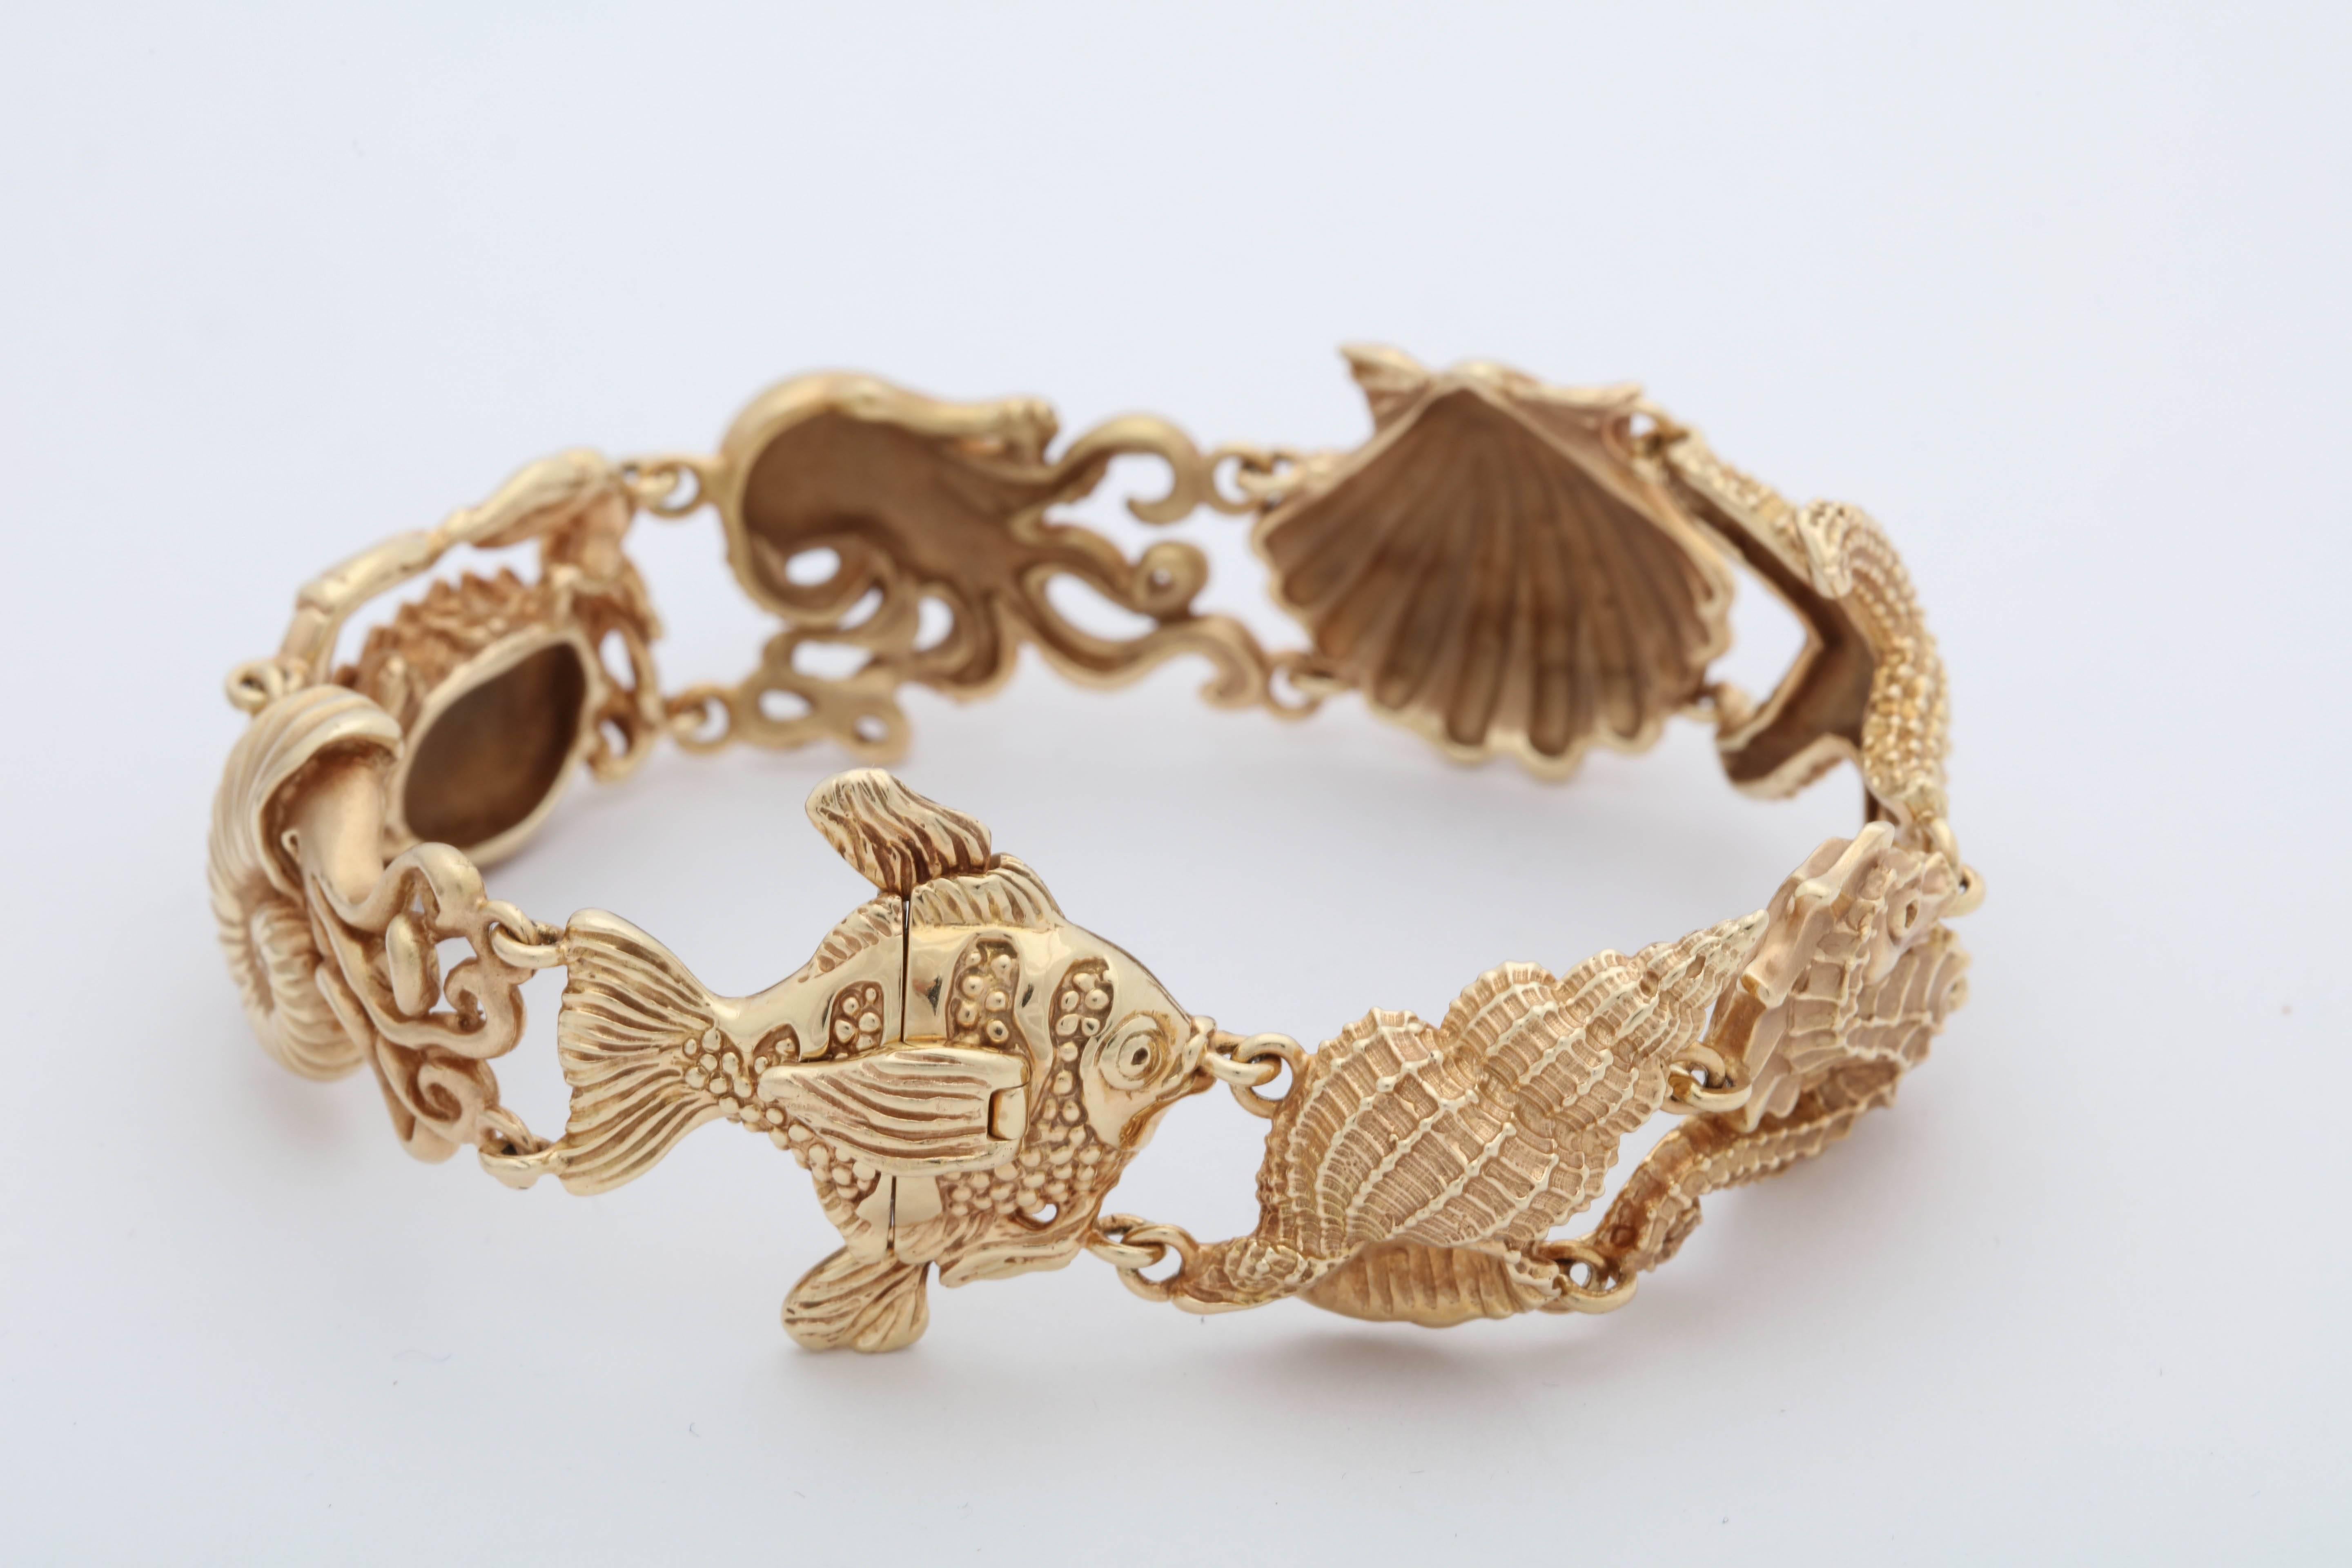 One Ladies Nautilus Figural Bracelet Composed Of One SeaShell,One Cornucopia, One Seahorse, One Octopus,And One Figural Crab With One Angel fish And One Starfish Motif . Created In 14kt Gold With A Beautiful Invisible Safety Clasp Mechanism Created